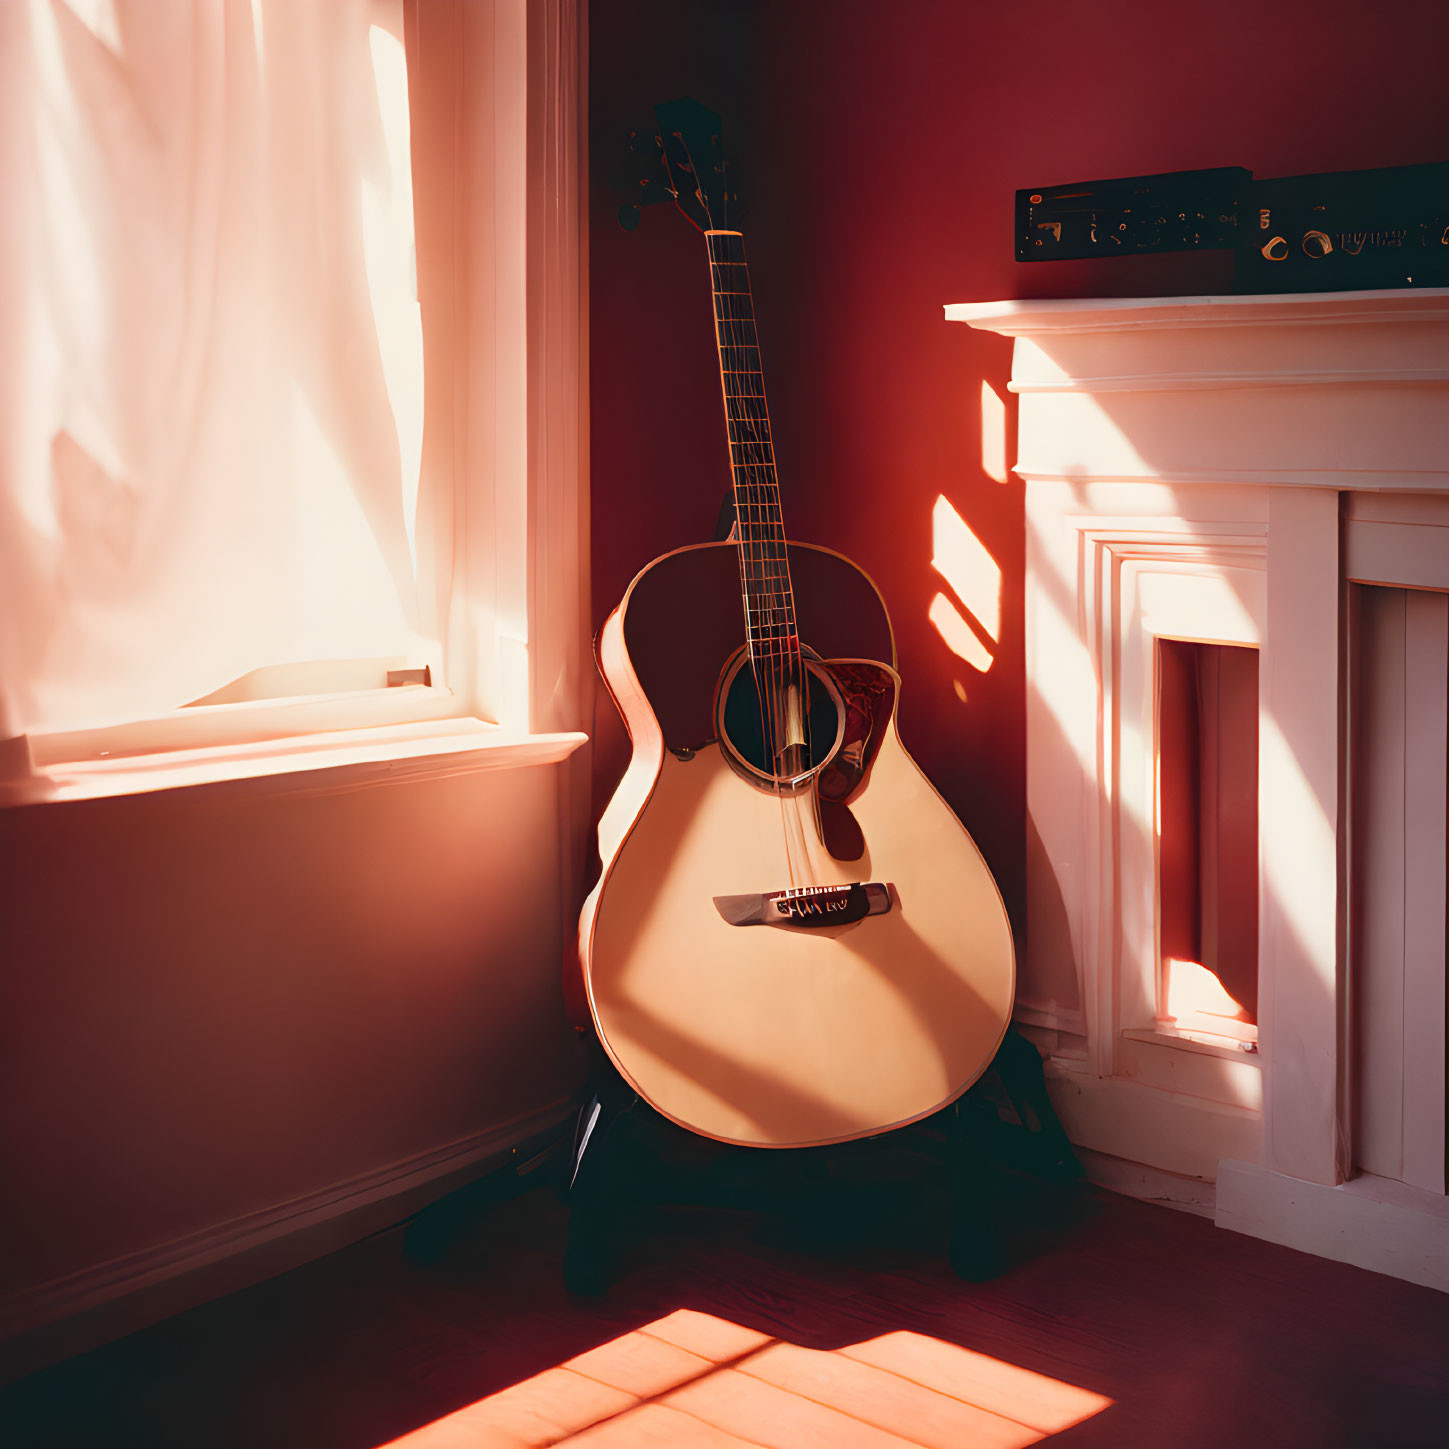 Cozy room with acoustic guitar by sunny window